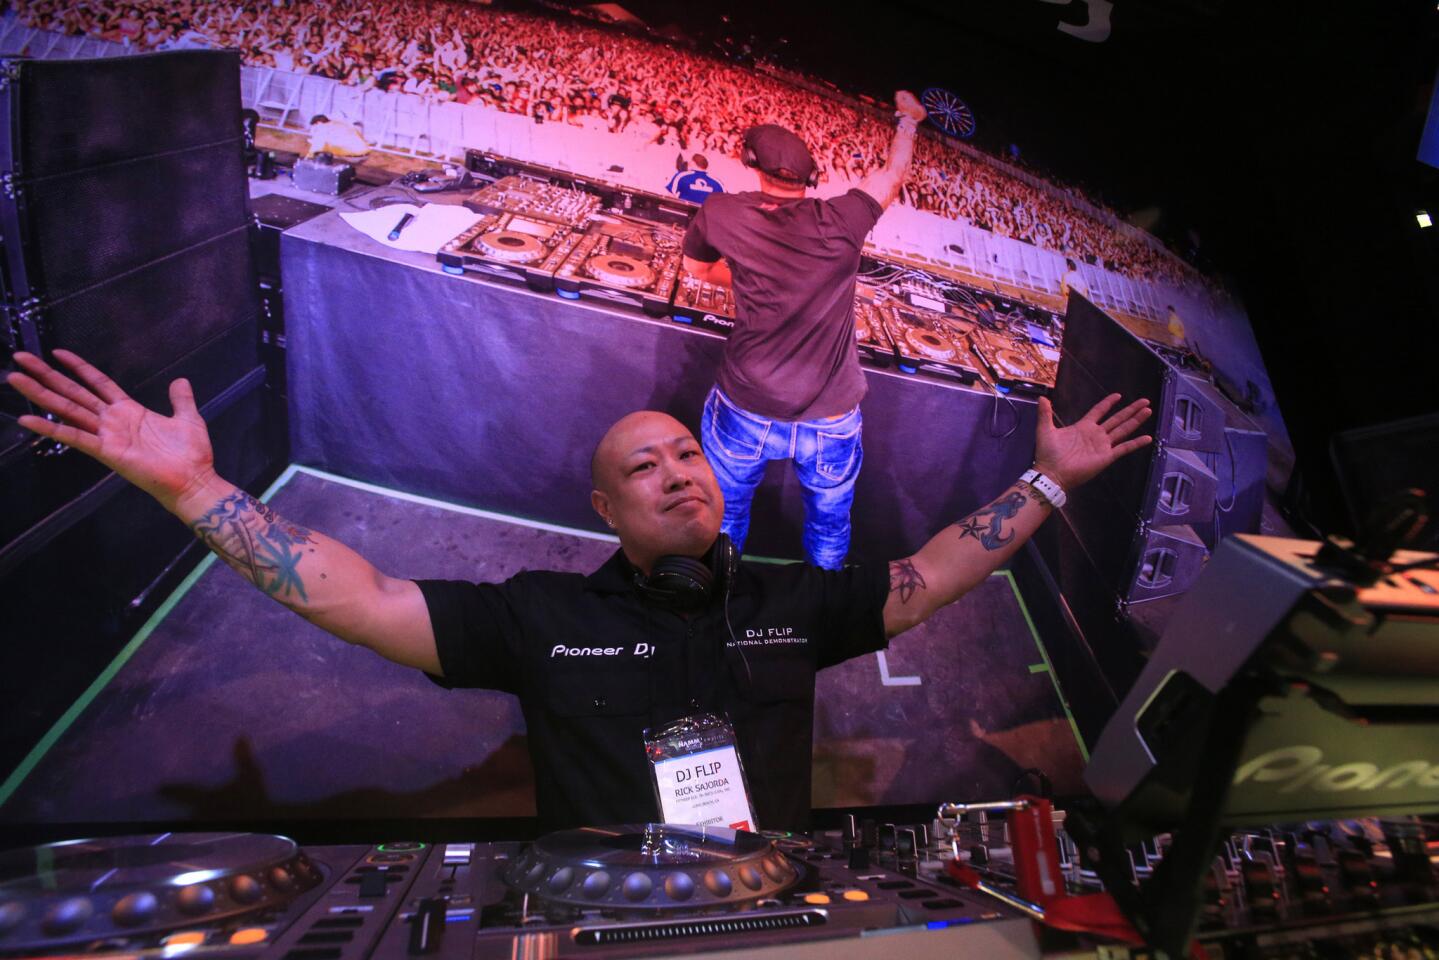 DJ Flip (aka Rick Sajorda) rocks the Pioneer booth at the NAMM Show at the Anaheim Convention Center last month.